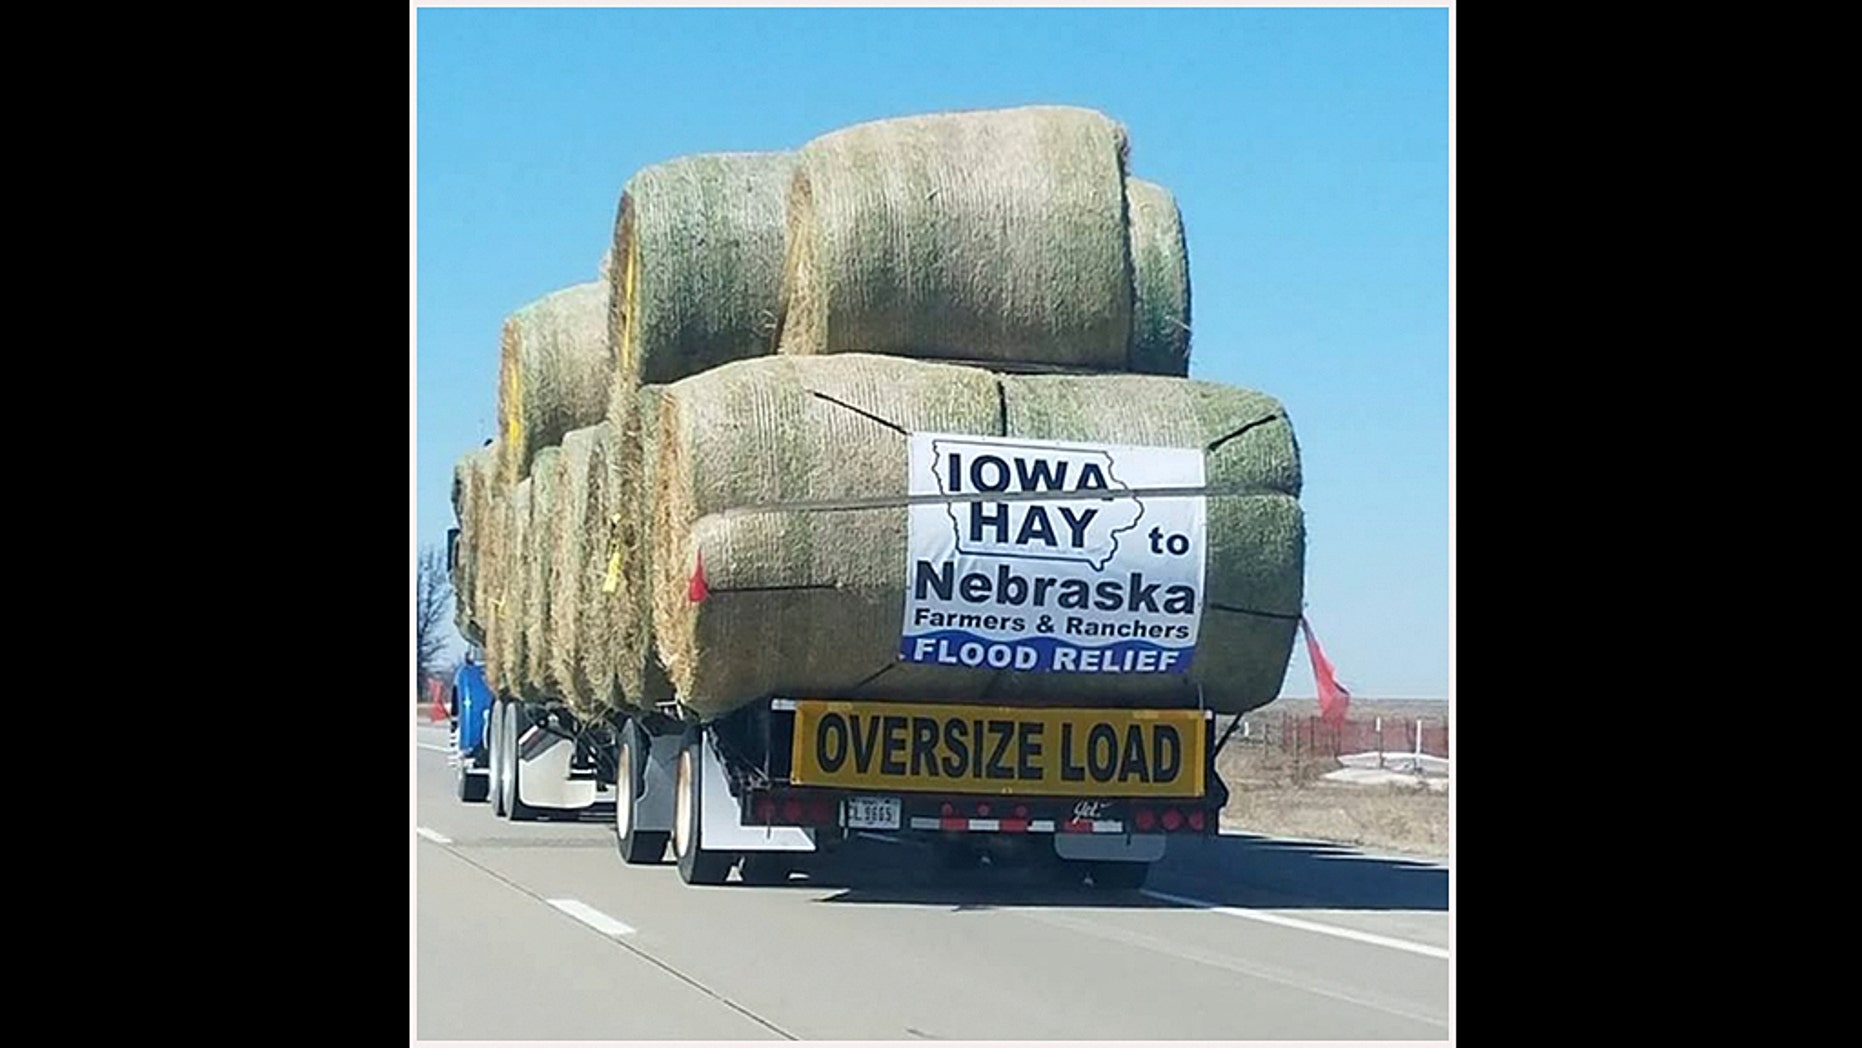 The large semi truck with the caption "Iowa Hay to Nebraska Flood Relief"